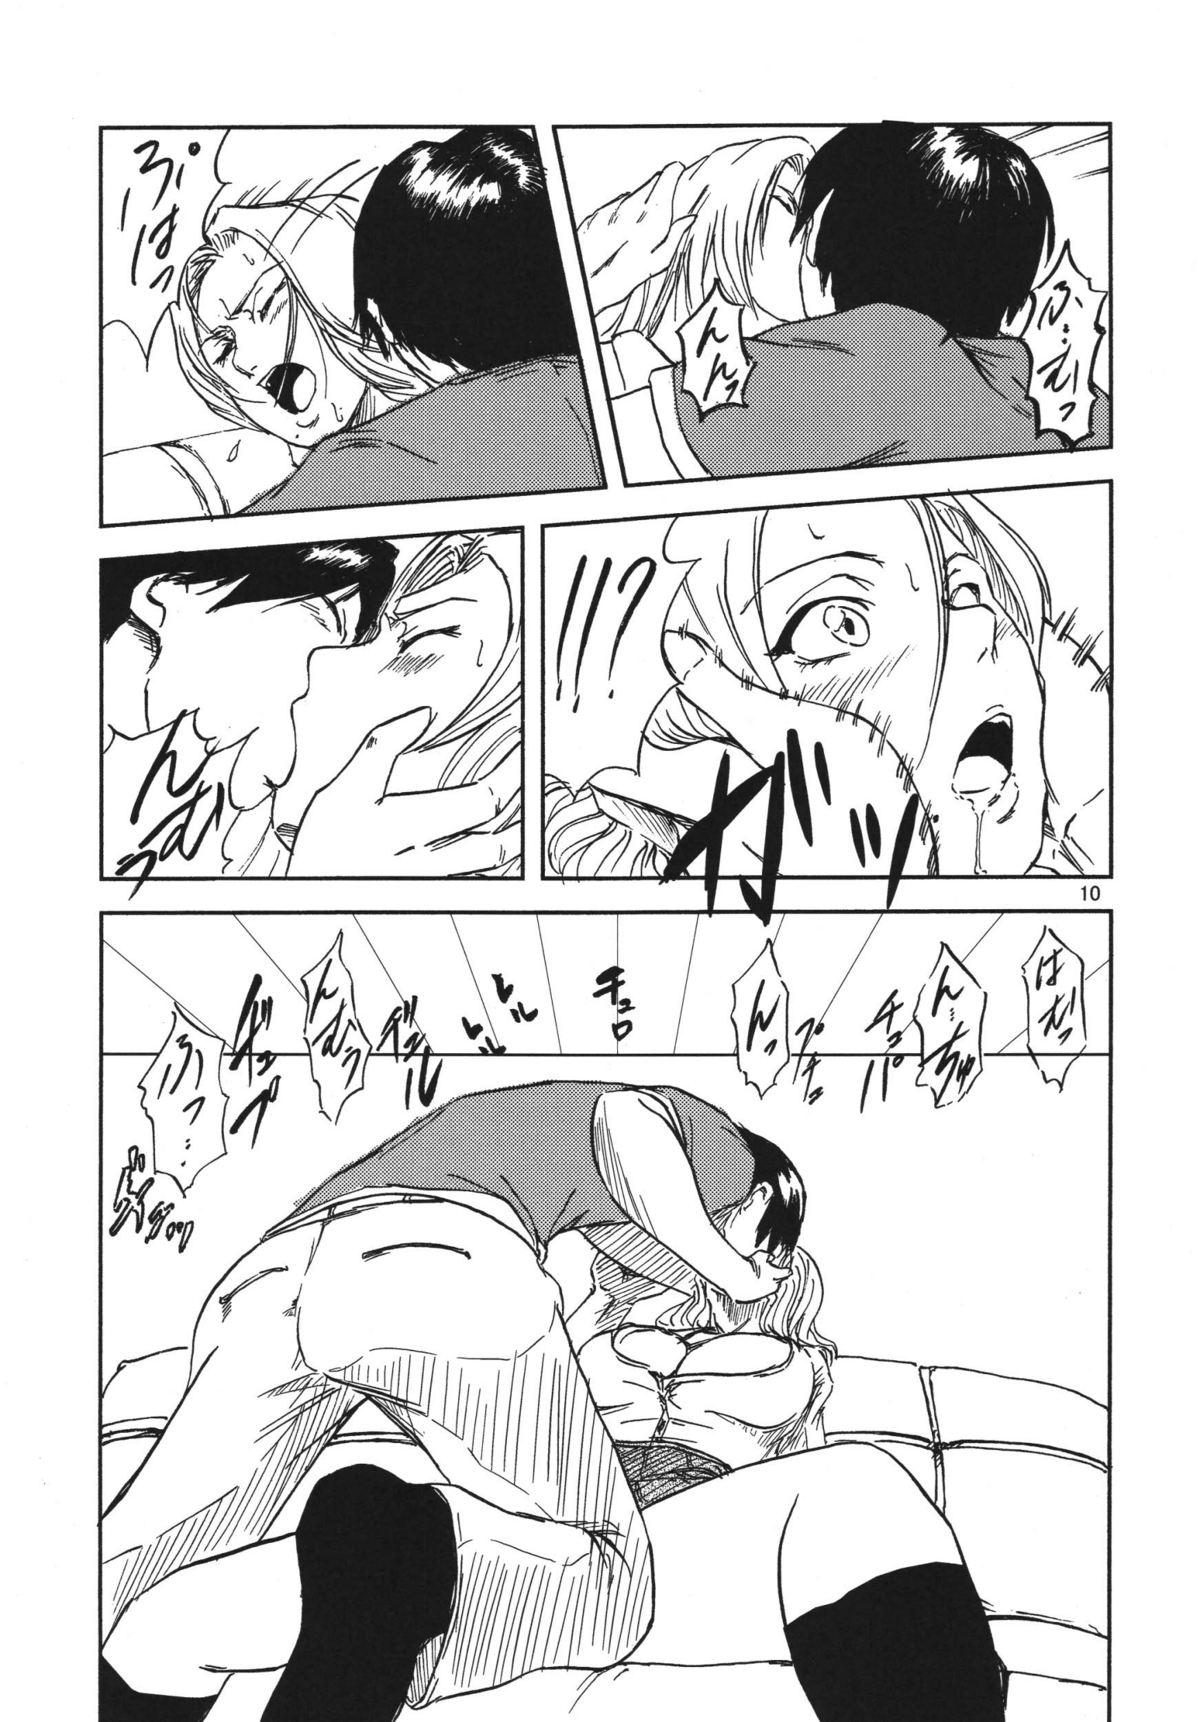 Wrestling NO MERCY 3 - Bleach Juggs - Page 10